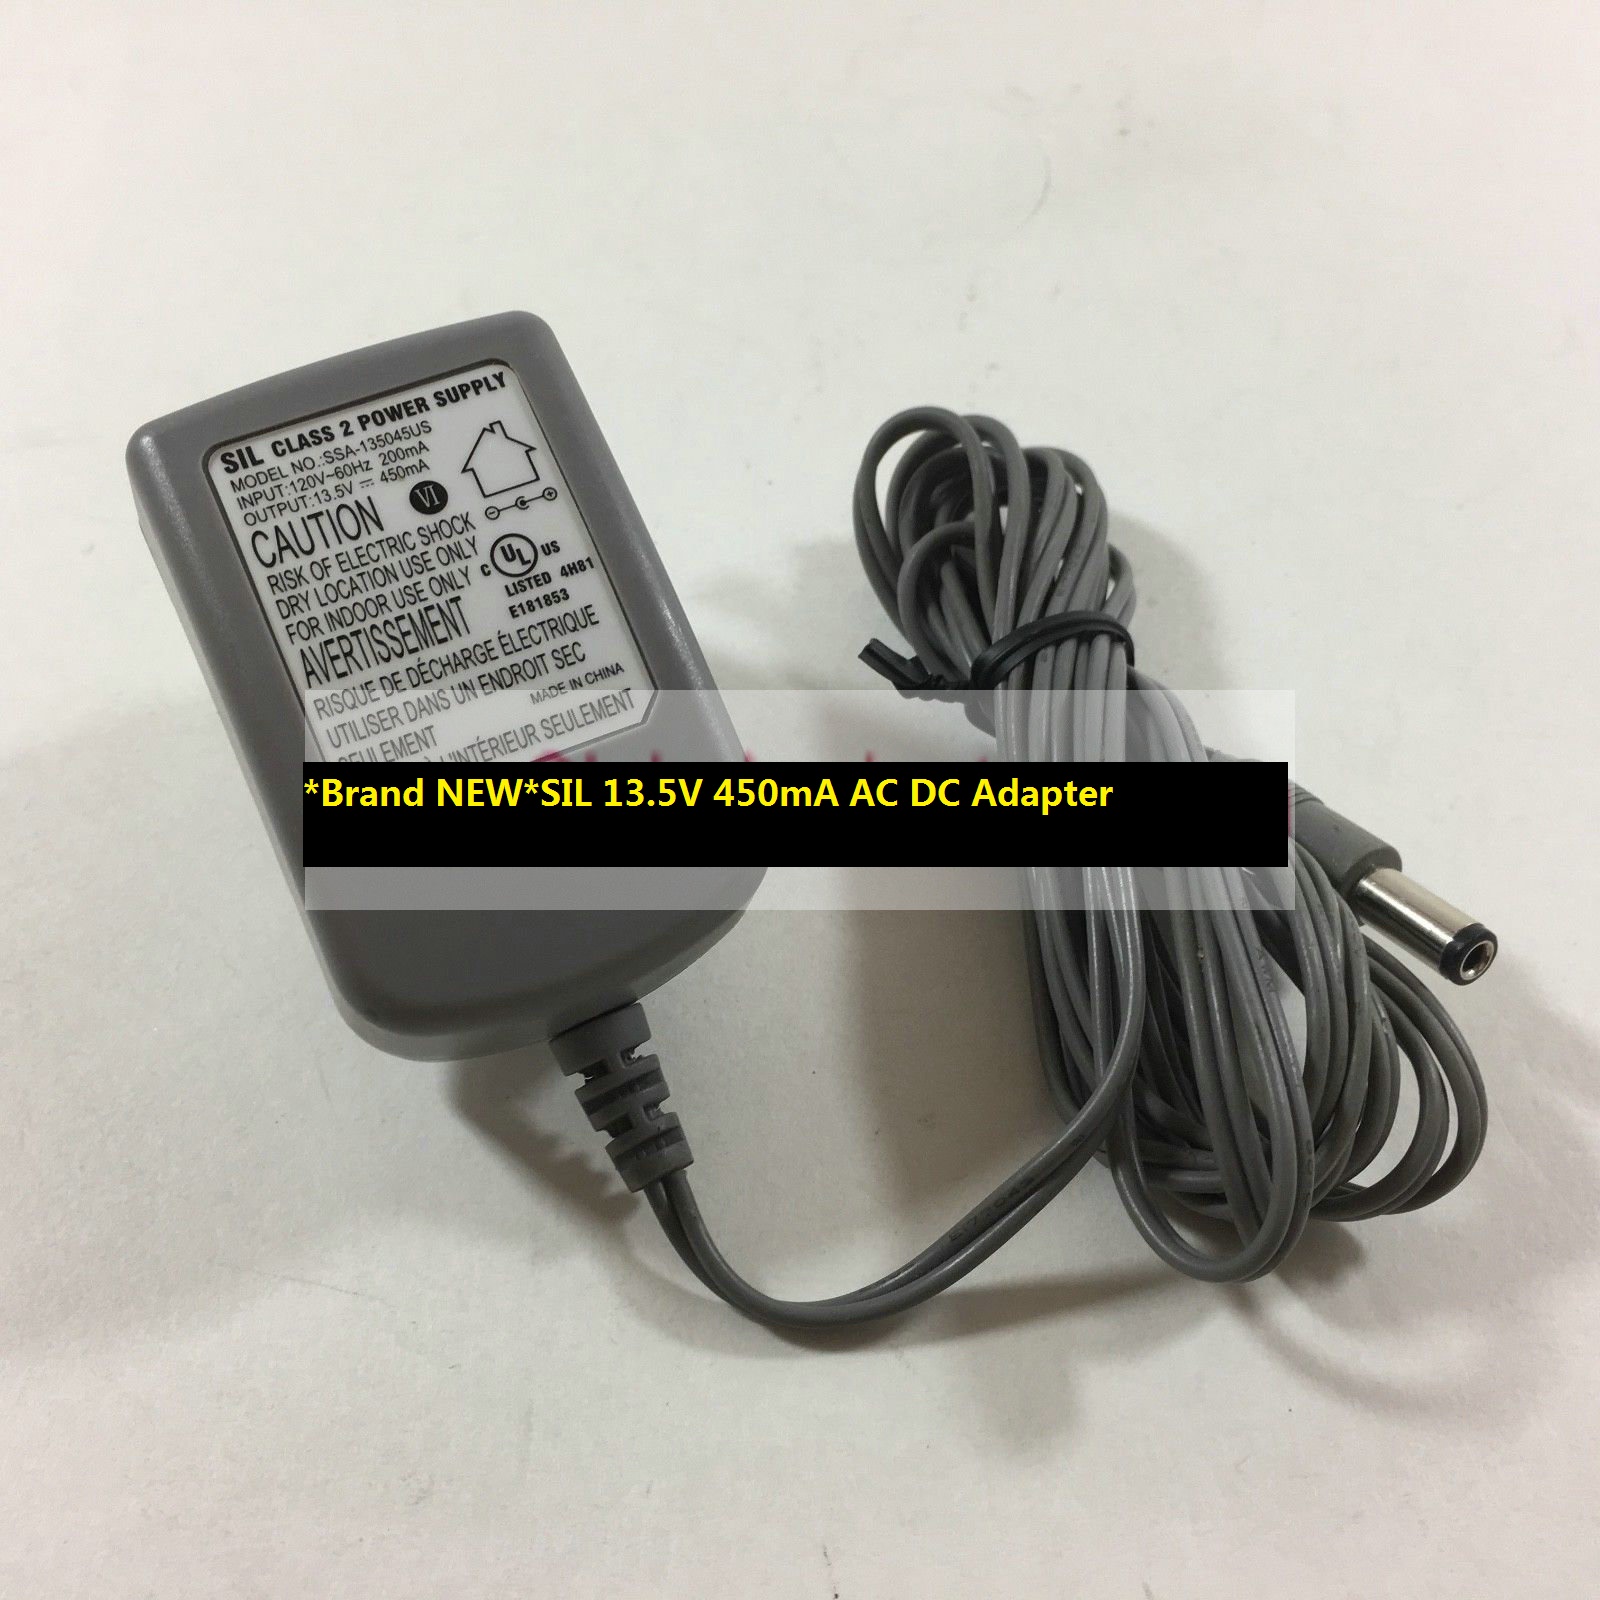 *Brand NEW*SIL SSA-135045US DC 13.5V 450mA CLASS 2 POWER SUPPLY FOR ELECTROLUX